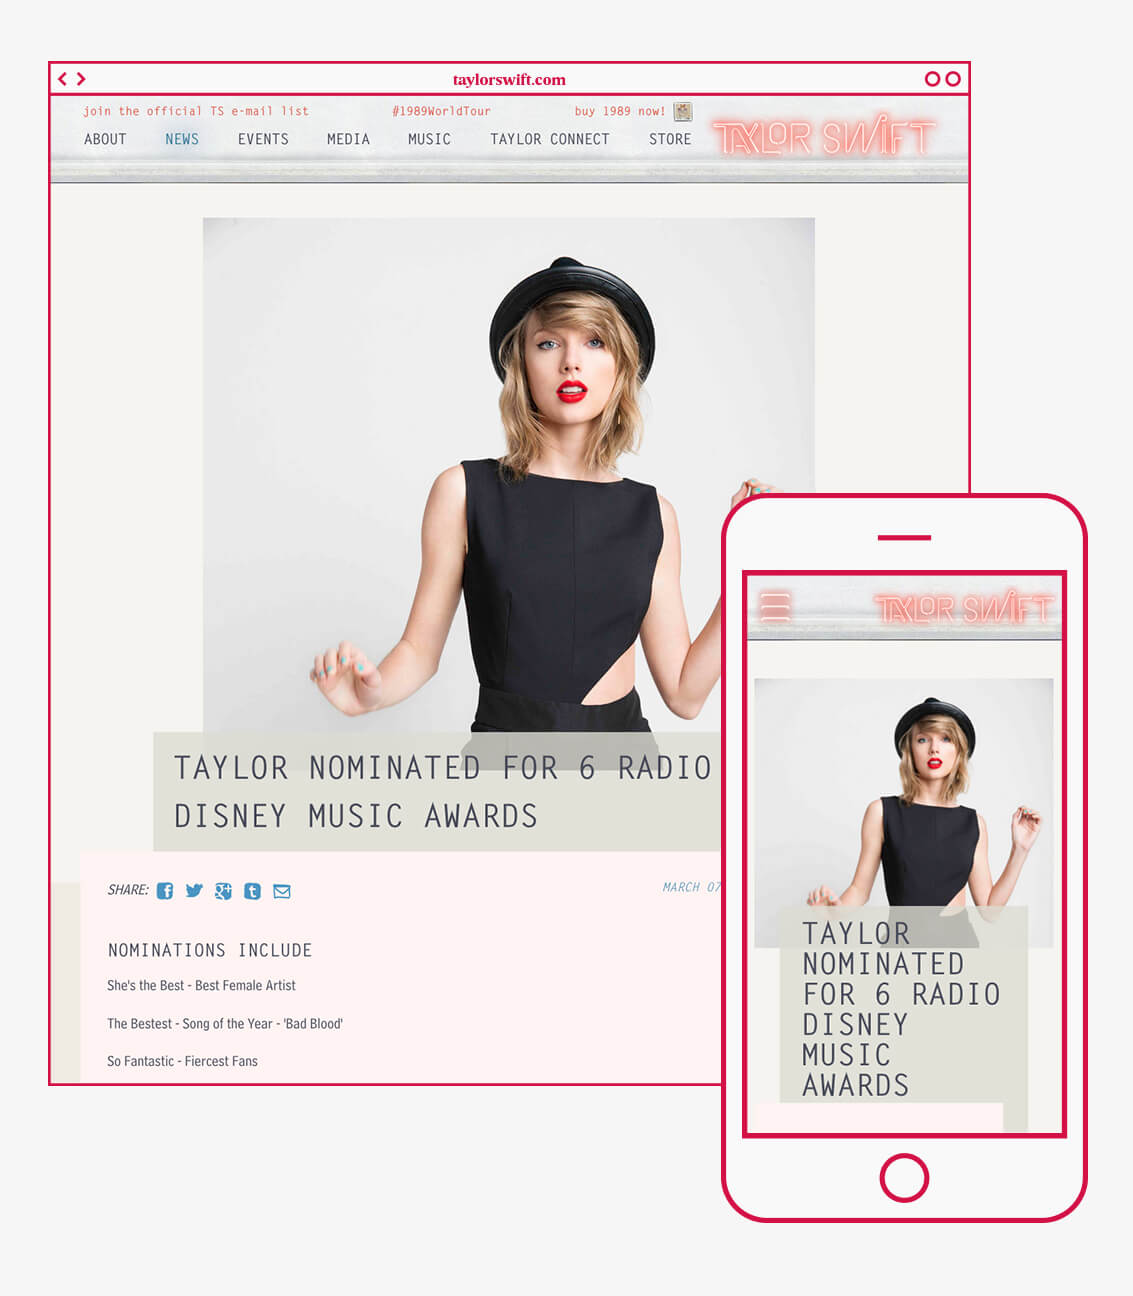 Responsive news article page website design for taylorswift.com with branding elements for Taylor Swift and her 1989 album